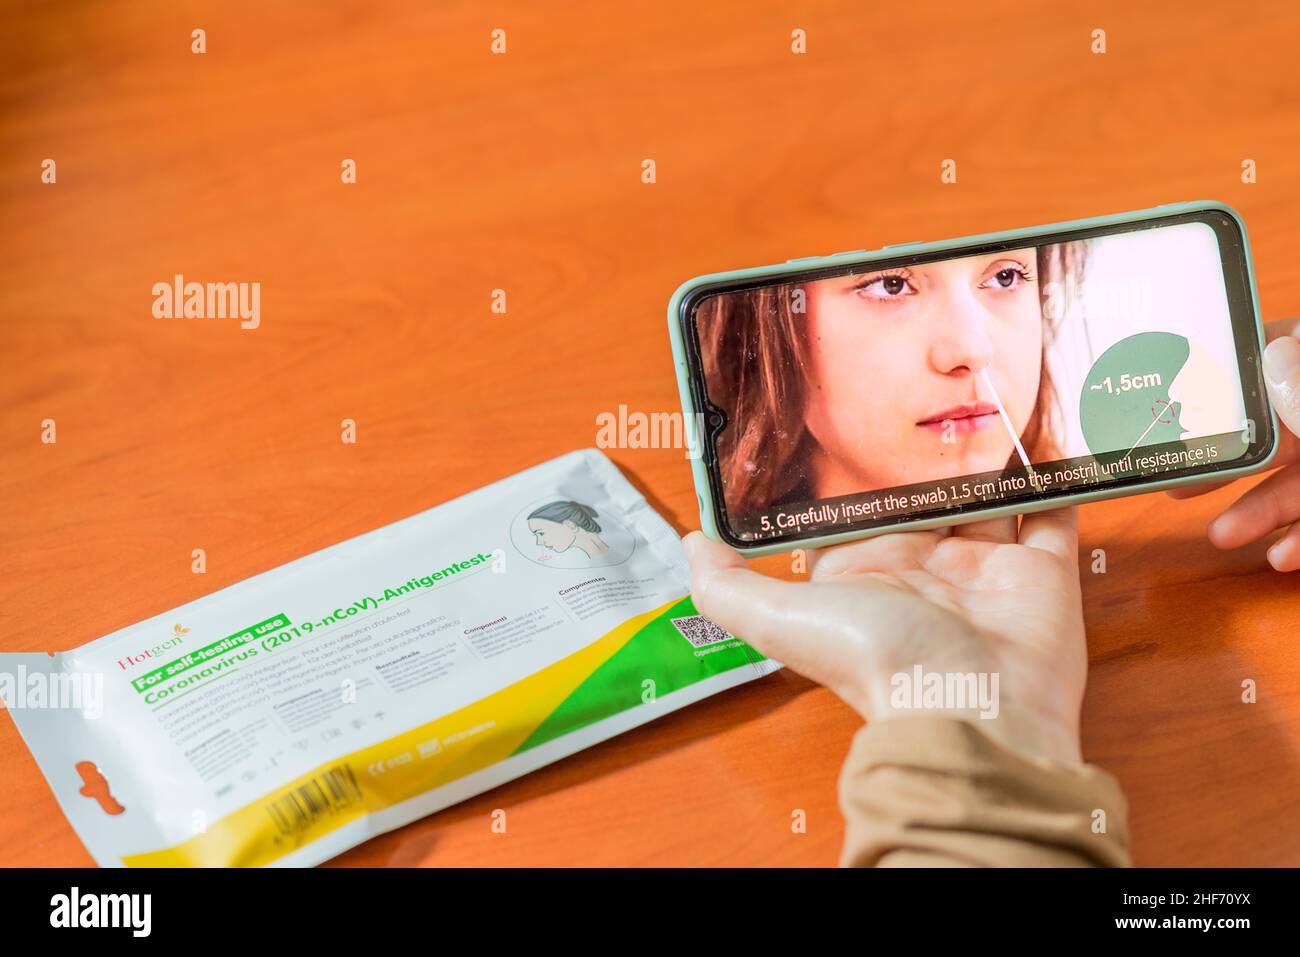 Seville, Spain. 28 December 2021. Detail of a woman's hands holding a smartphone, with a Covid19 self-test kit on a wooden table, watching a video exp Stock Photo